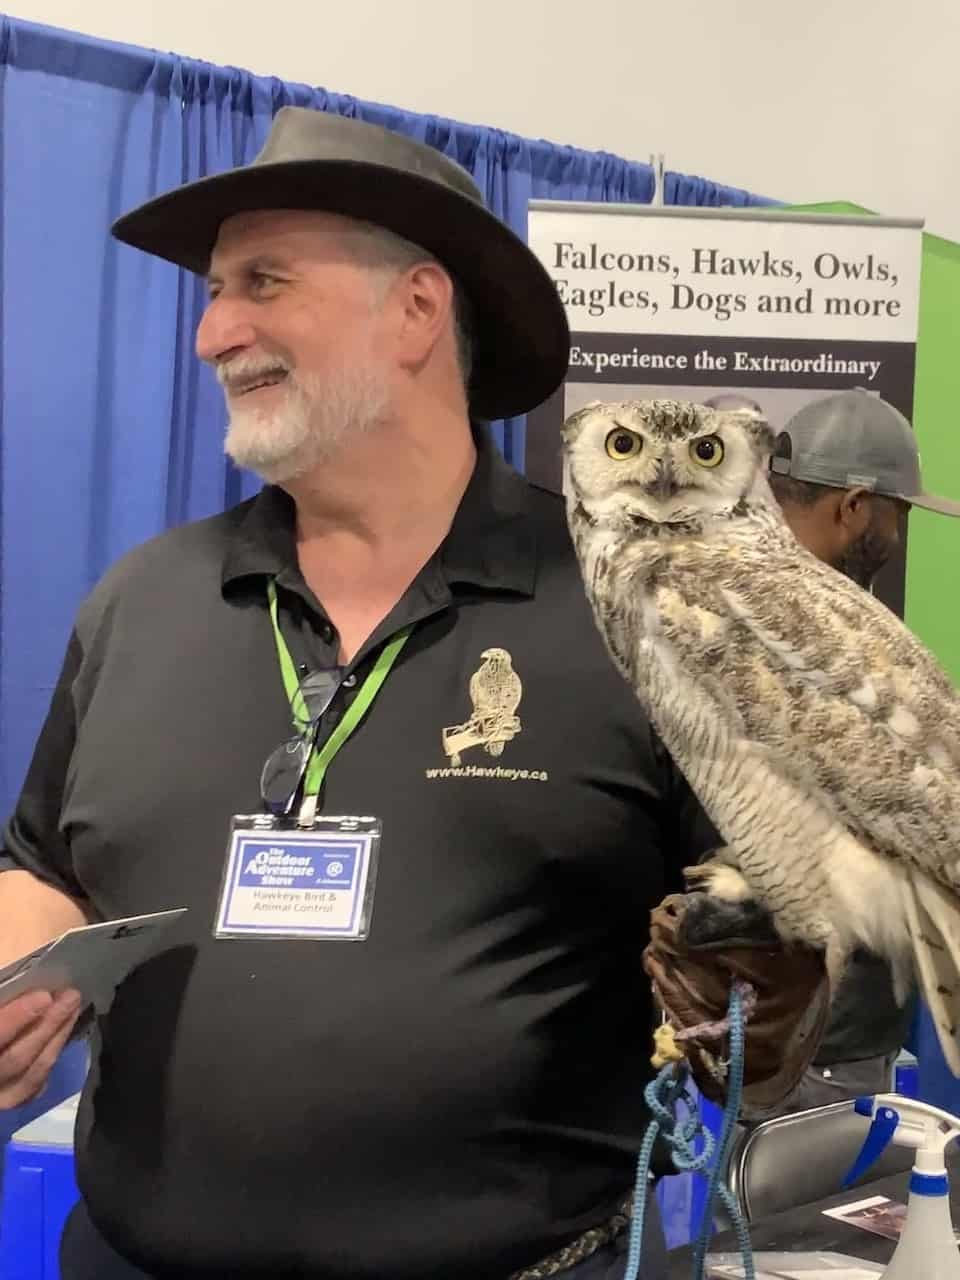 Outdoor Adventure Show Owl in Toronto Ontario Canada - This Falconry company offers classes, demos and education using falcons, owls, hawks and eagles.